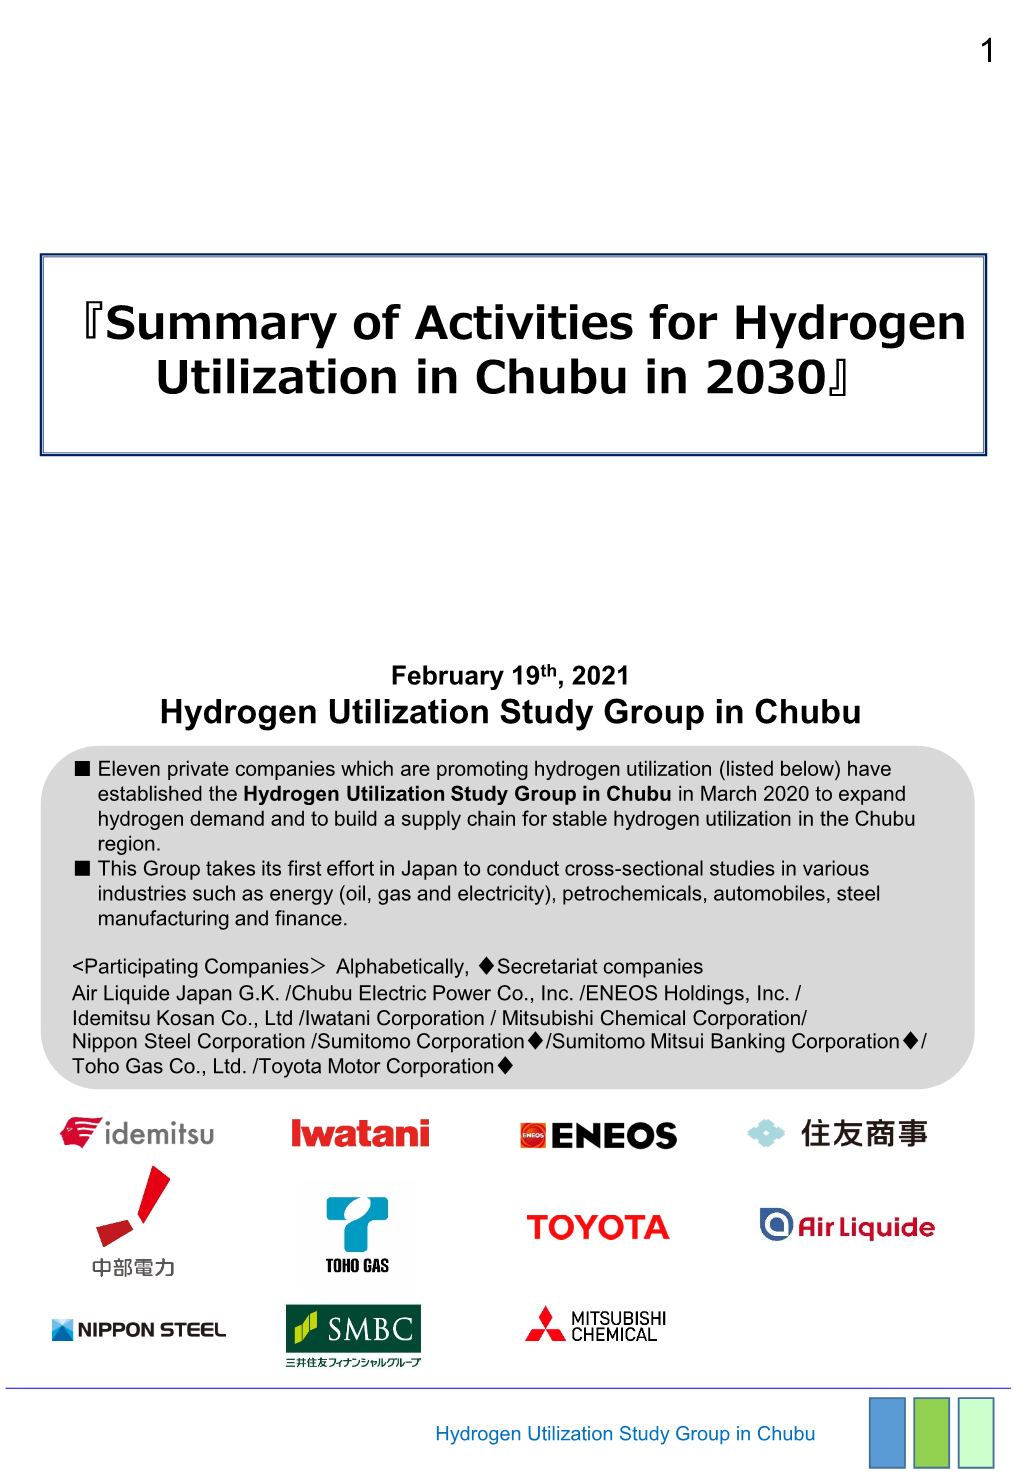 『Summary of Activities for Hydrogen Utilization in Chubu in 2030』